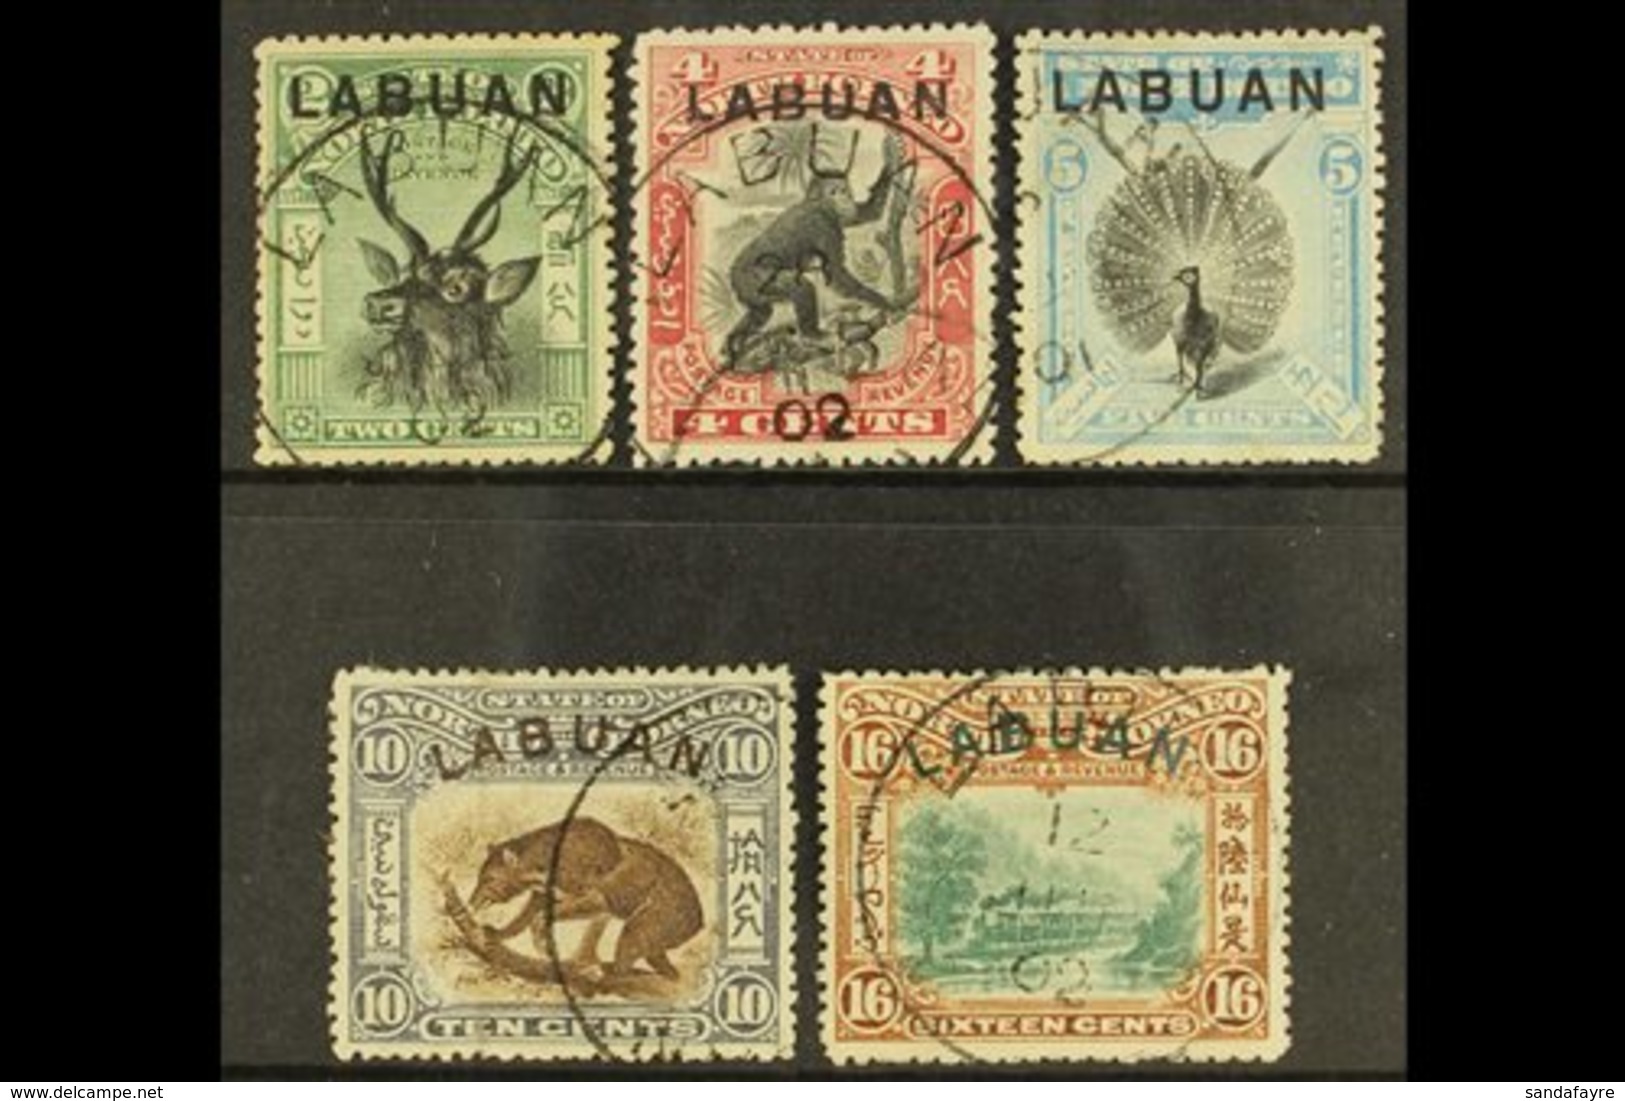 1900-02 Pictorial 2c, 4c Carmine, 5c, 10c And 16c, Between SG 111/116, Cds Used. (5 Stamps) For More Images, Please Visi - Nordborneo (...-1963)